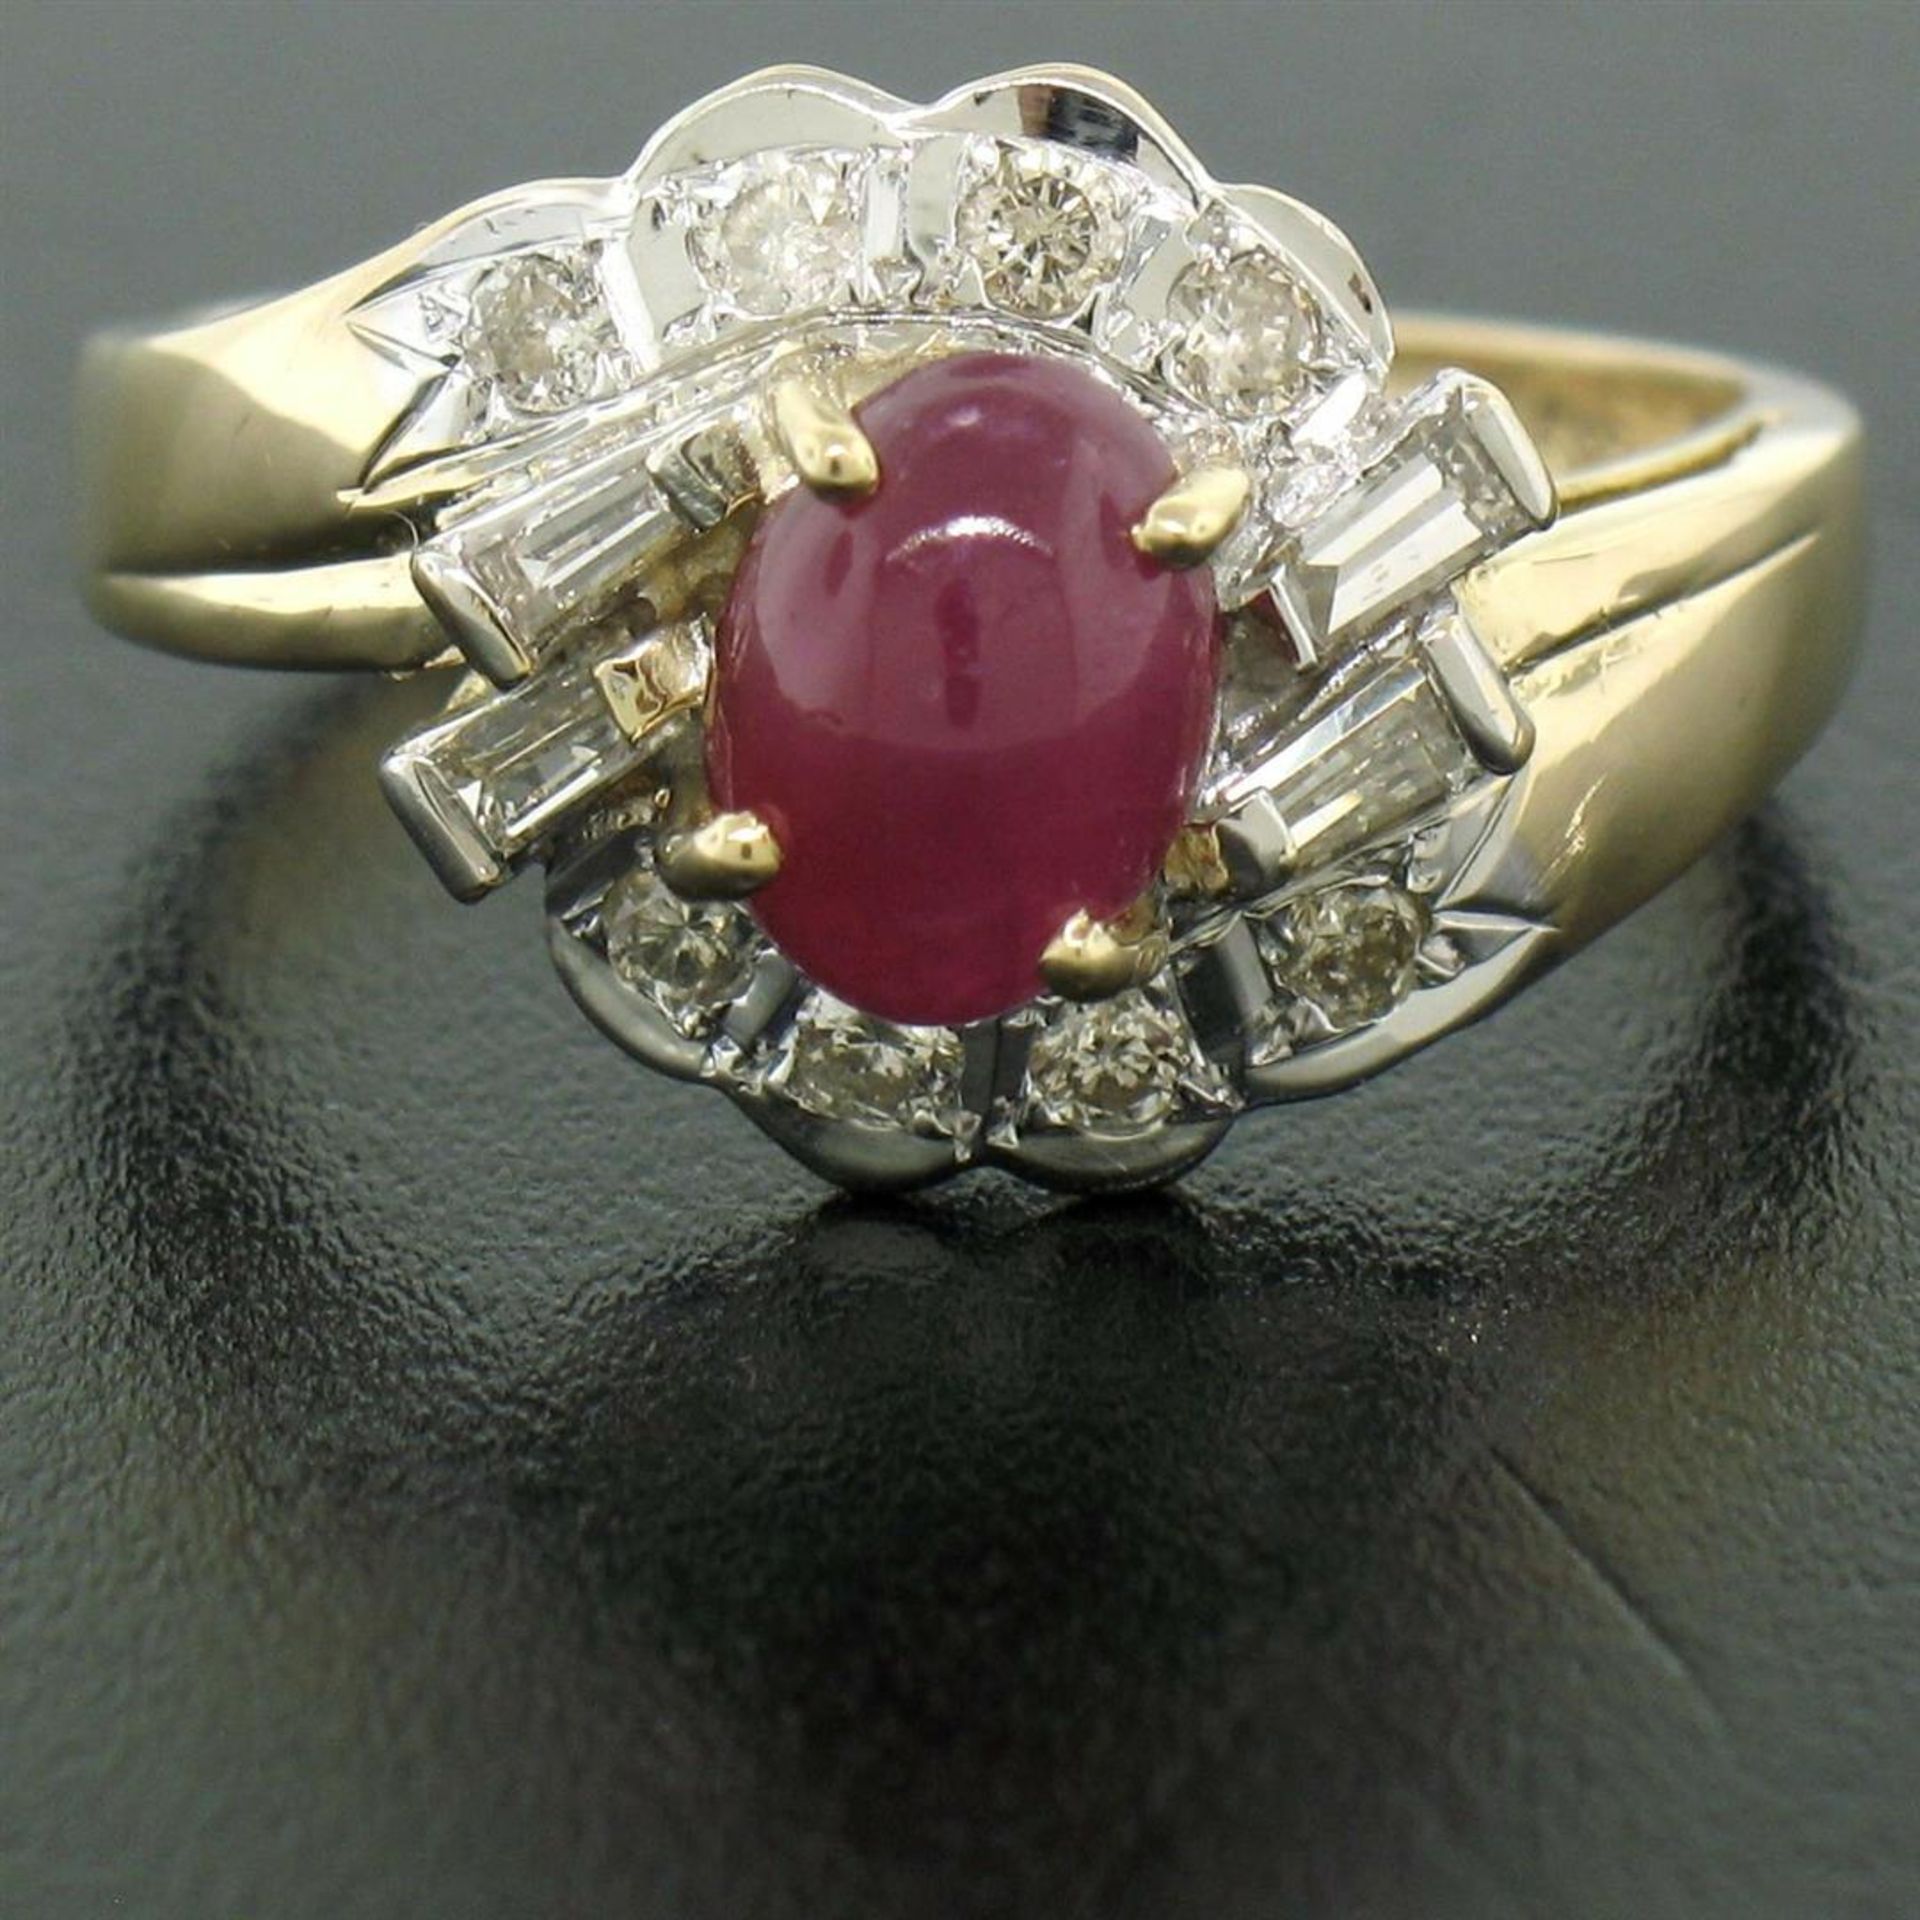 14kt White and Yellow Gold Cabochon Ruby and Diamond Ring - Image 5 of 7